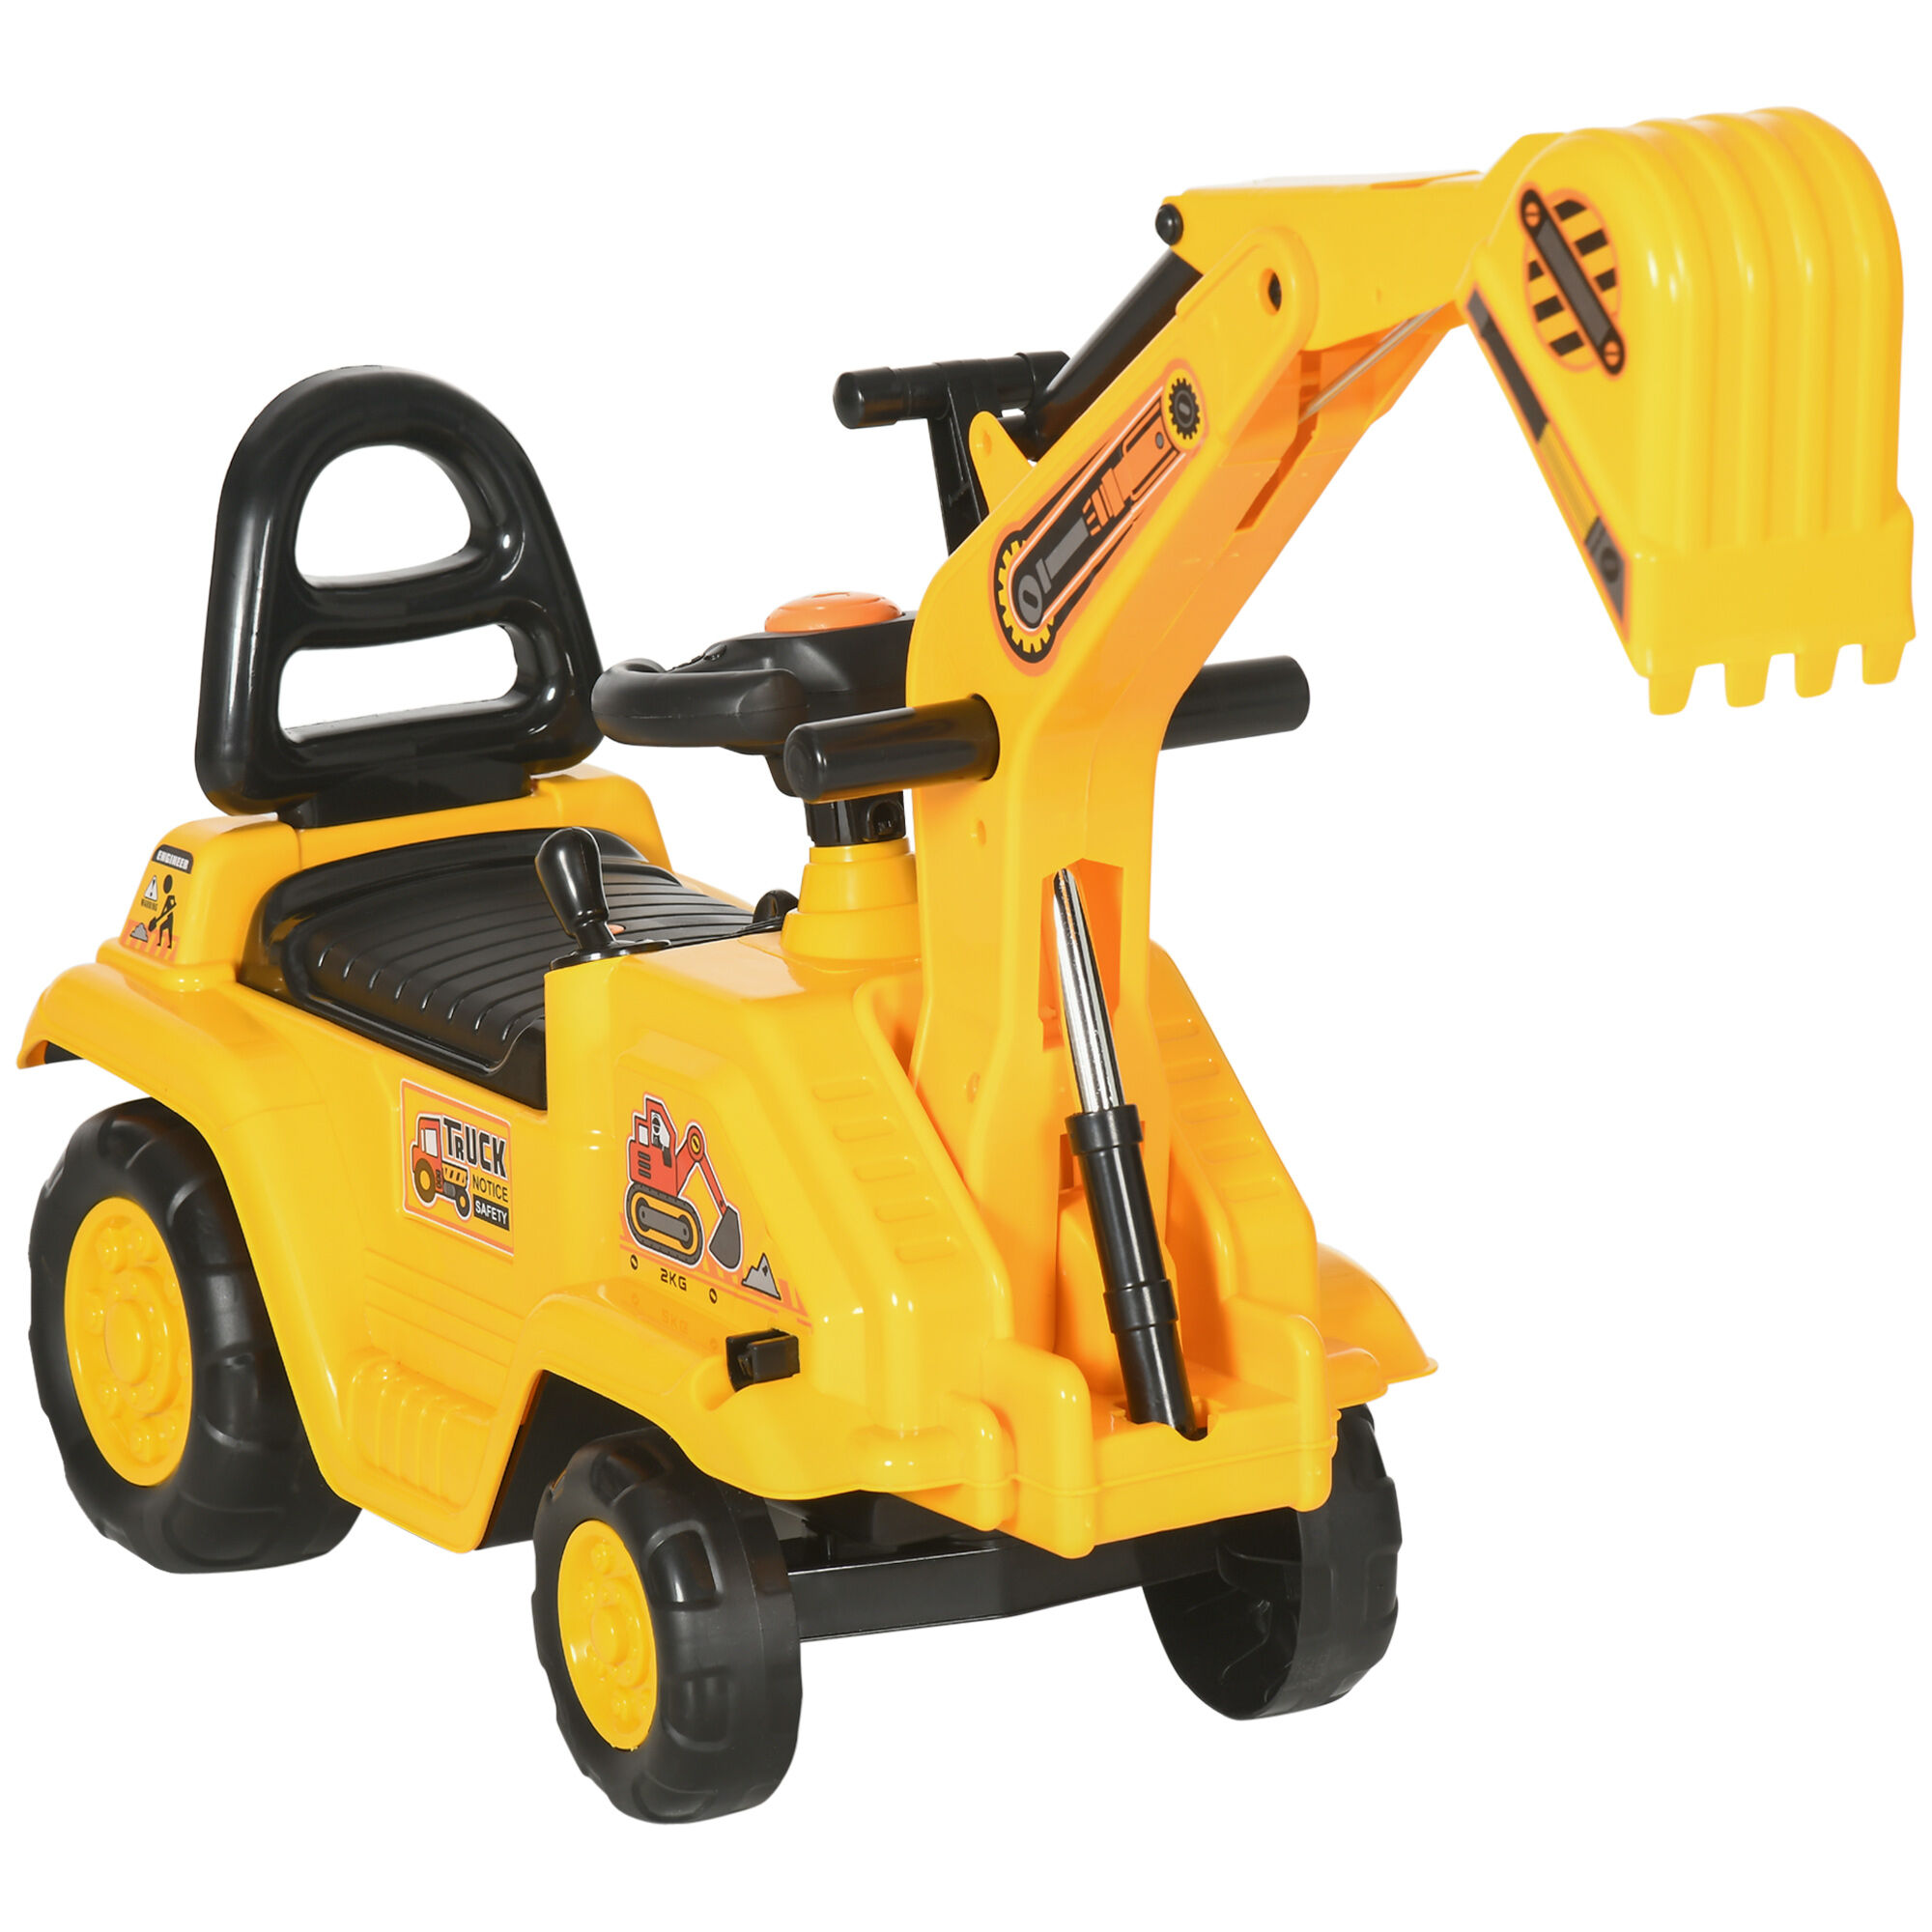 HOMCOM 3 in 1 Ride On Toy Excavator Digger Scooter Pulling Cart Pretend Play Construction Truck